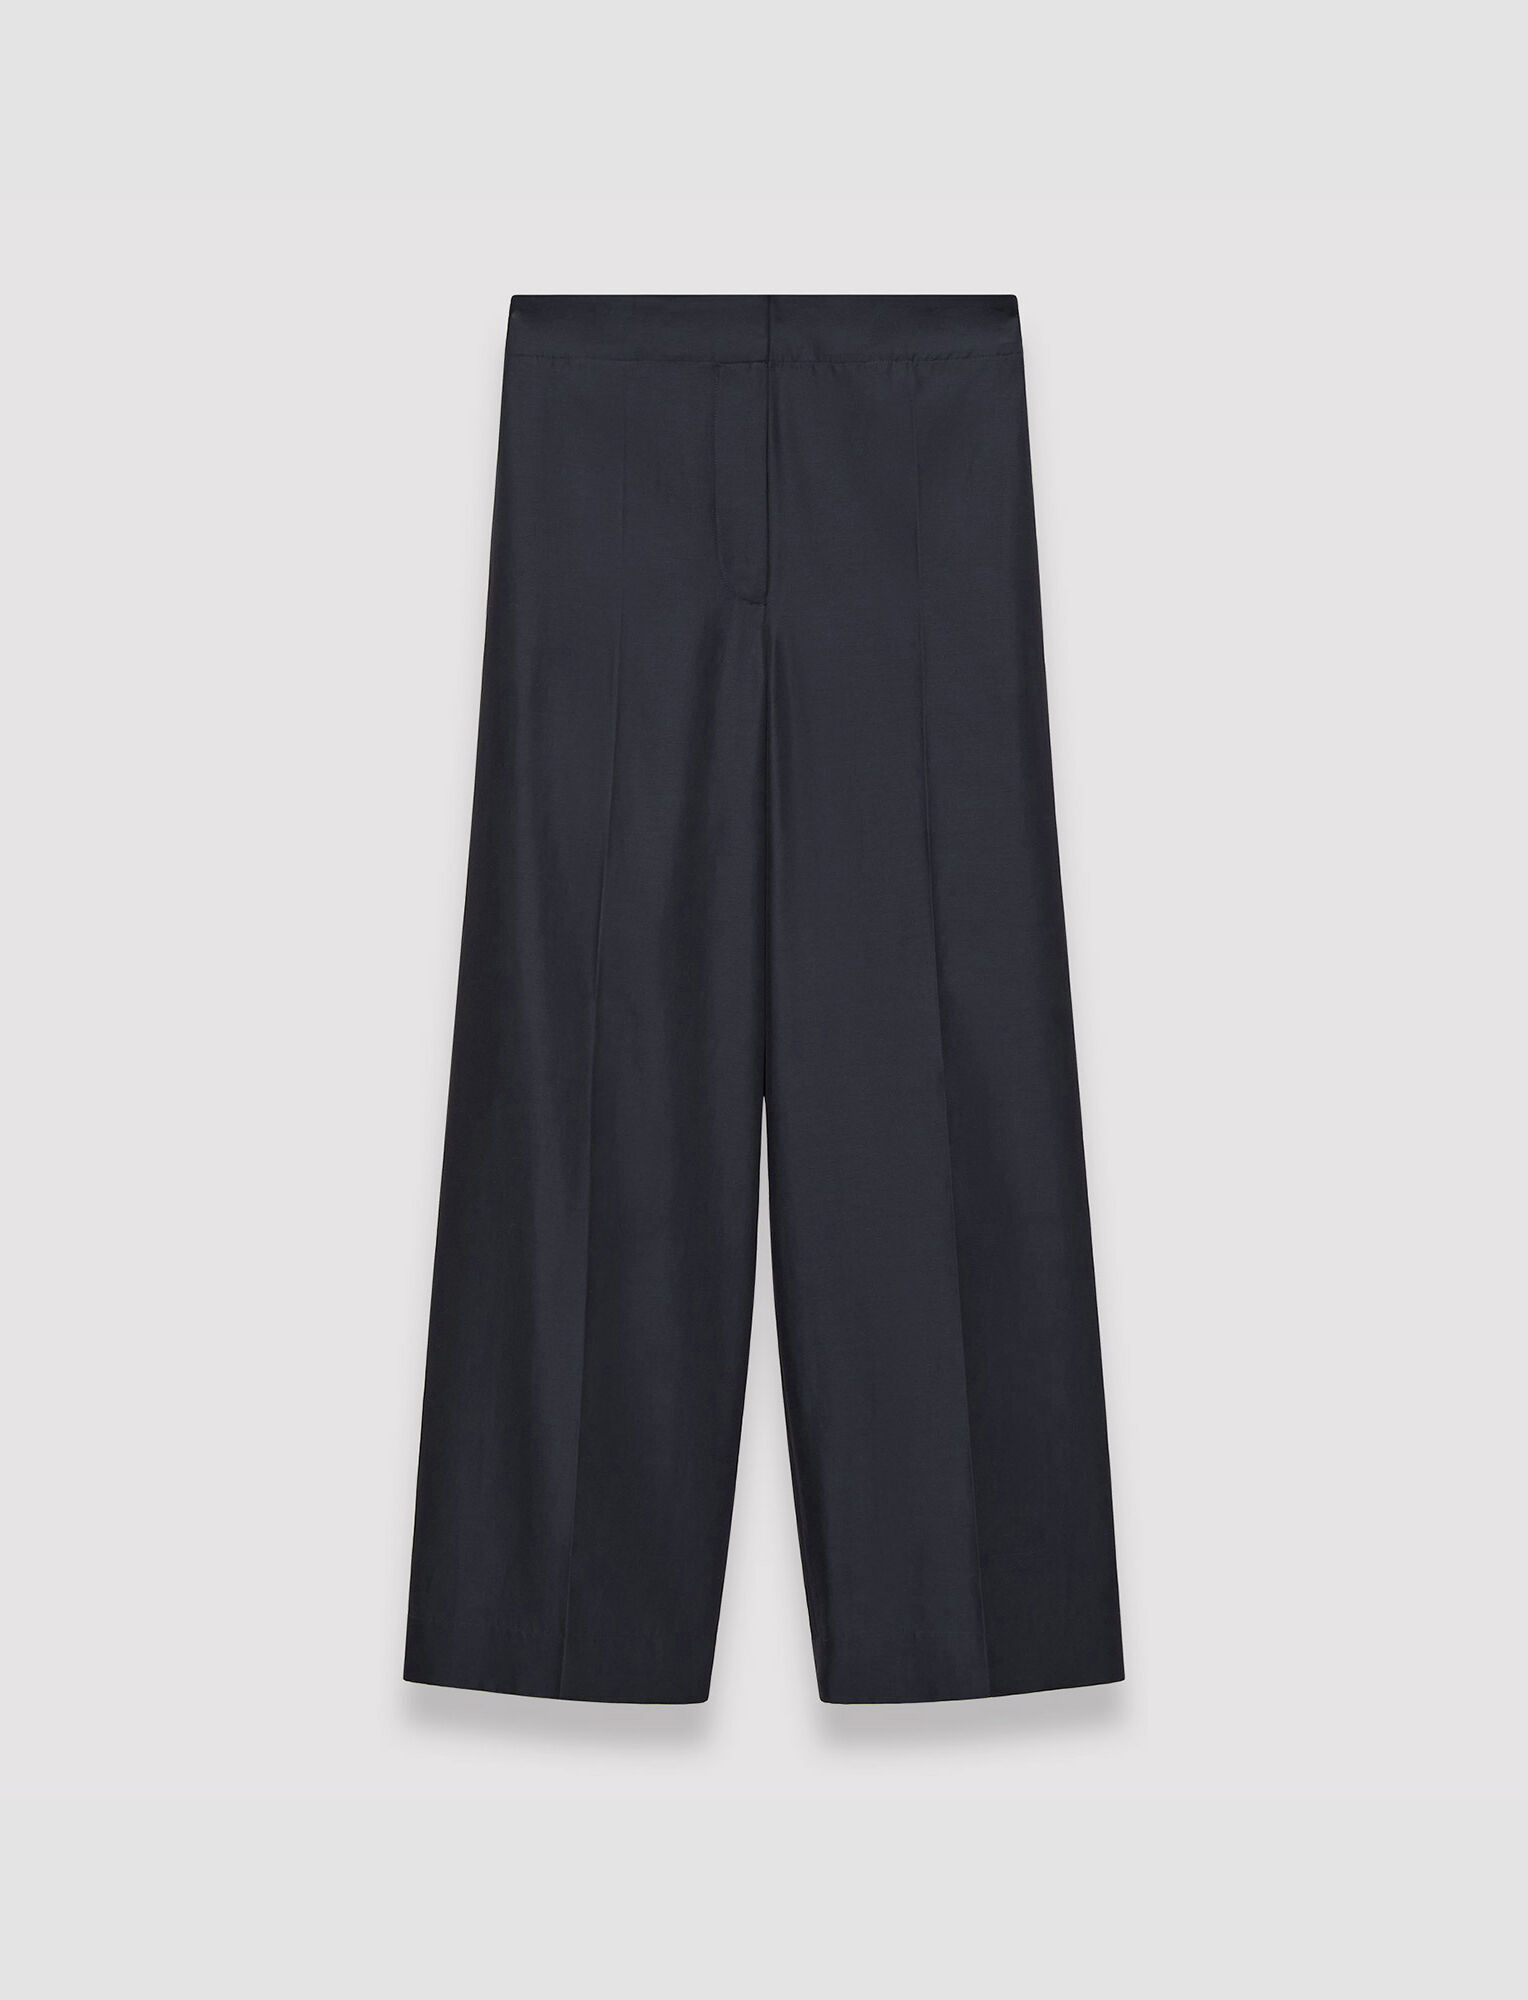 Joseph, Soft Cotton Silk Thurlow Trousers, in Navy